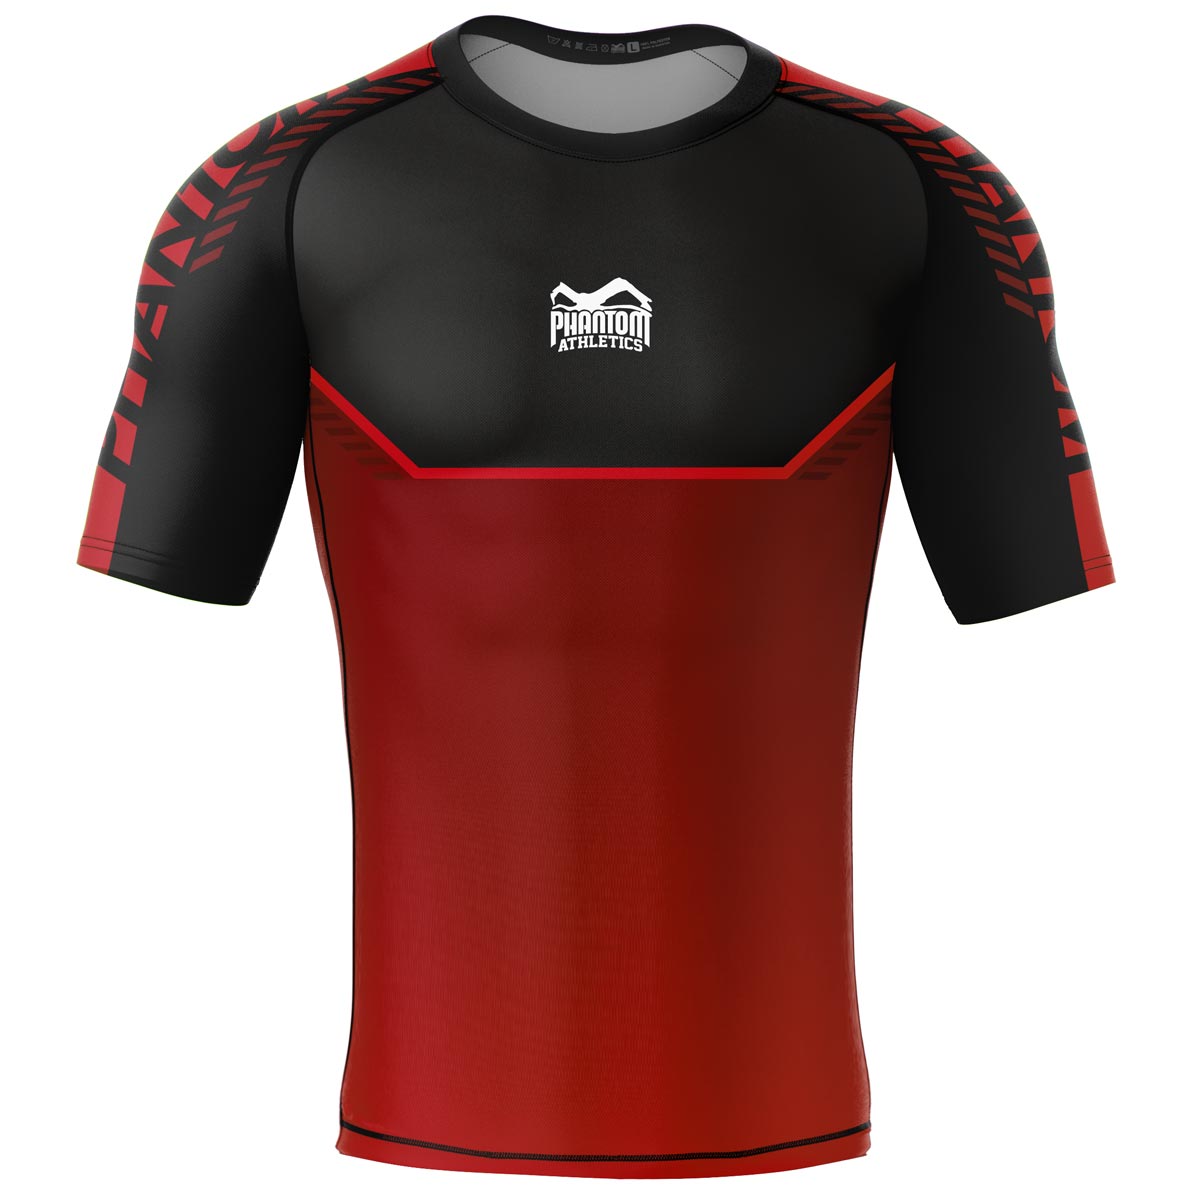 Phantom MMA Rashguard in short sleeves from the new limited RED Edition. Perfect protection and comfort in your martial arts such as BJJ, MMA, wrestling, grappling or Muay Thai.